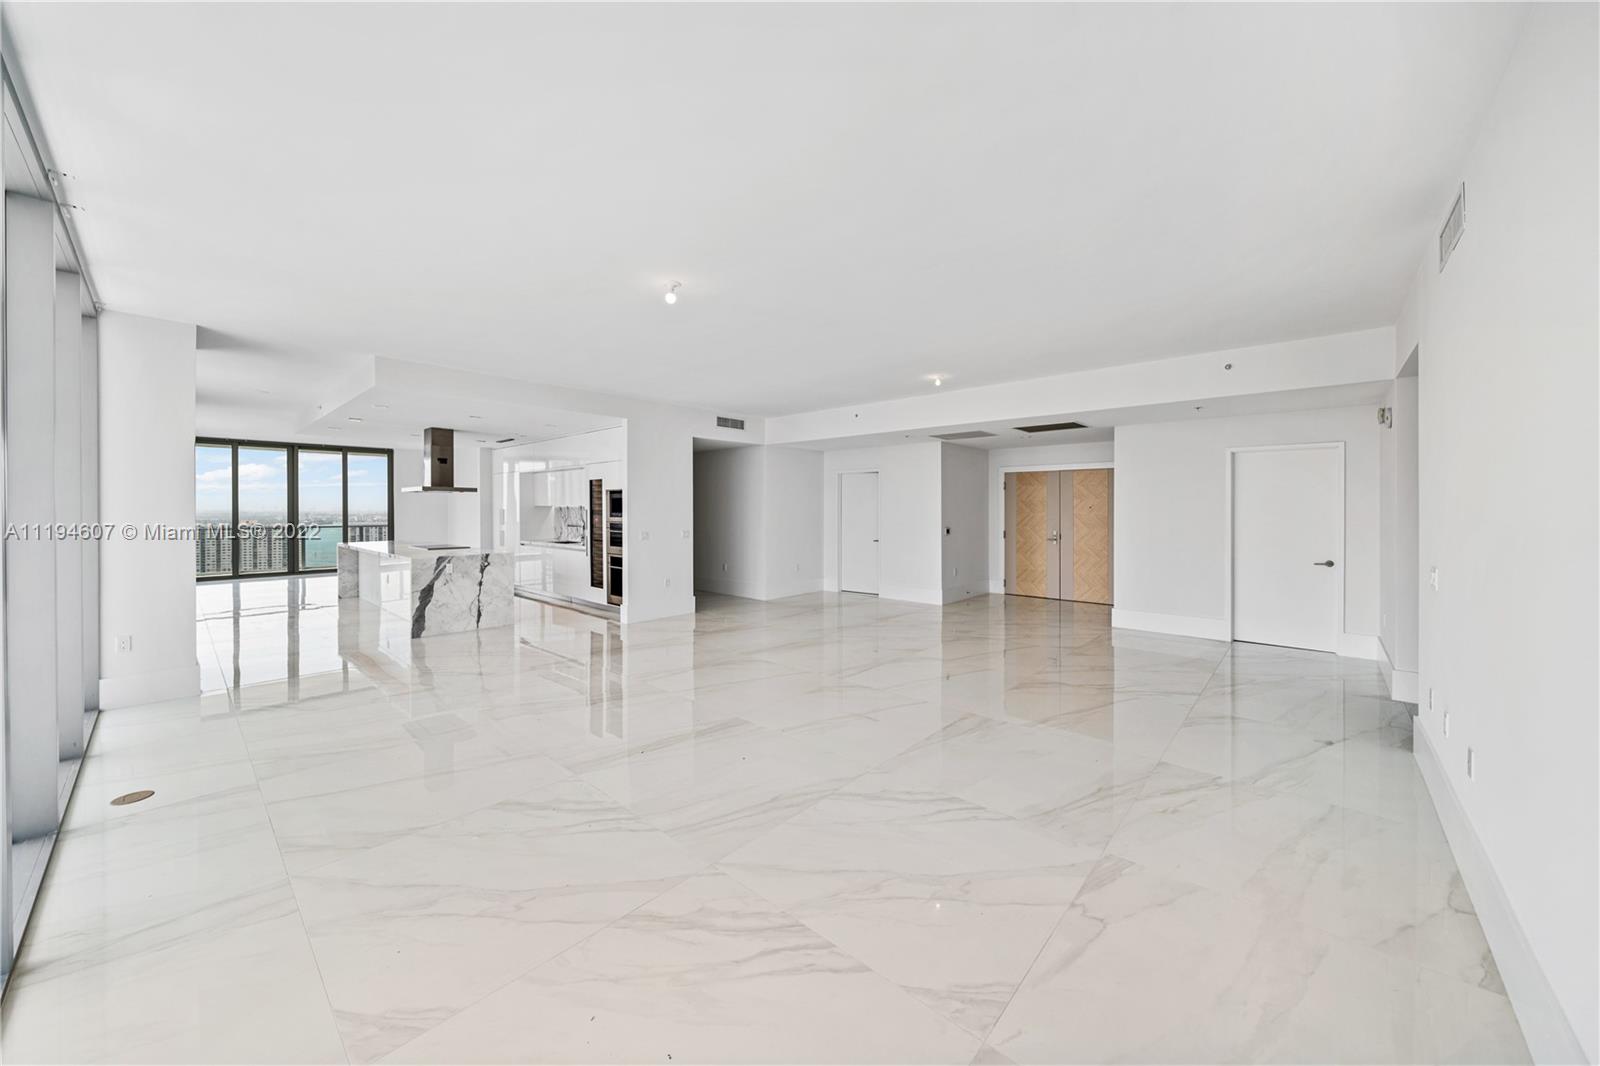 Outstanding 4 bedrooms, 4.5 bathrooms and family room with large balcony and boastful views of Sunny Isles Beach City! Buying your dream home has just got so much better! Very easy to show and our sale executive will guide you through the process.